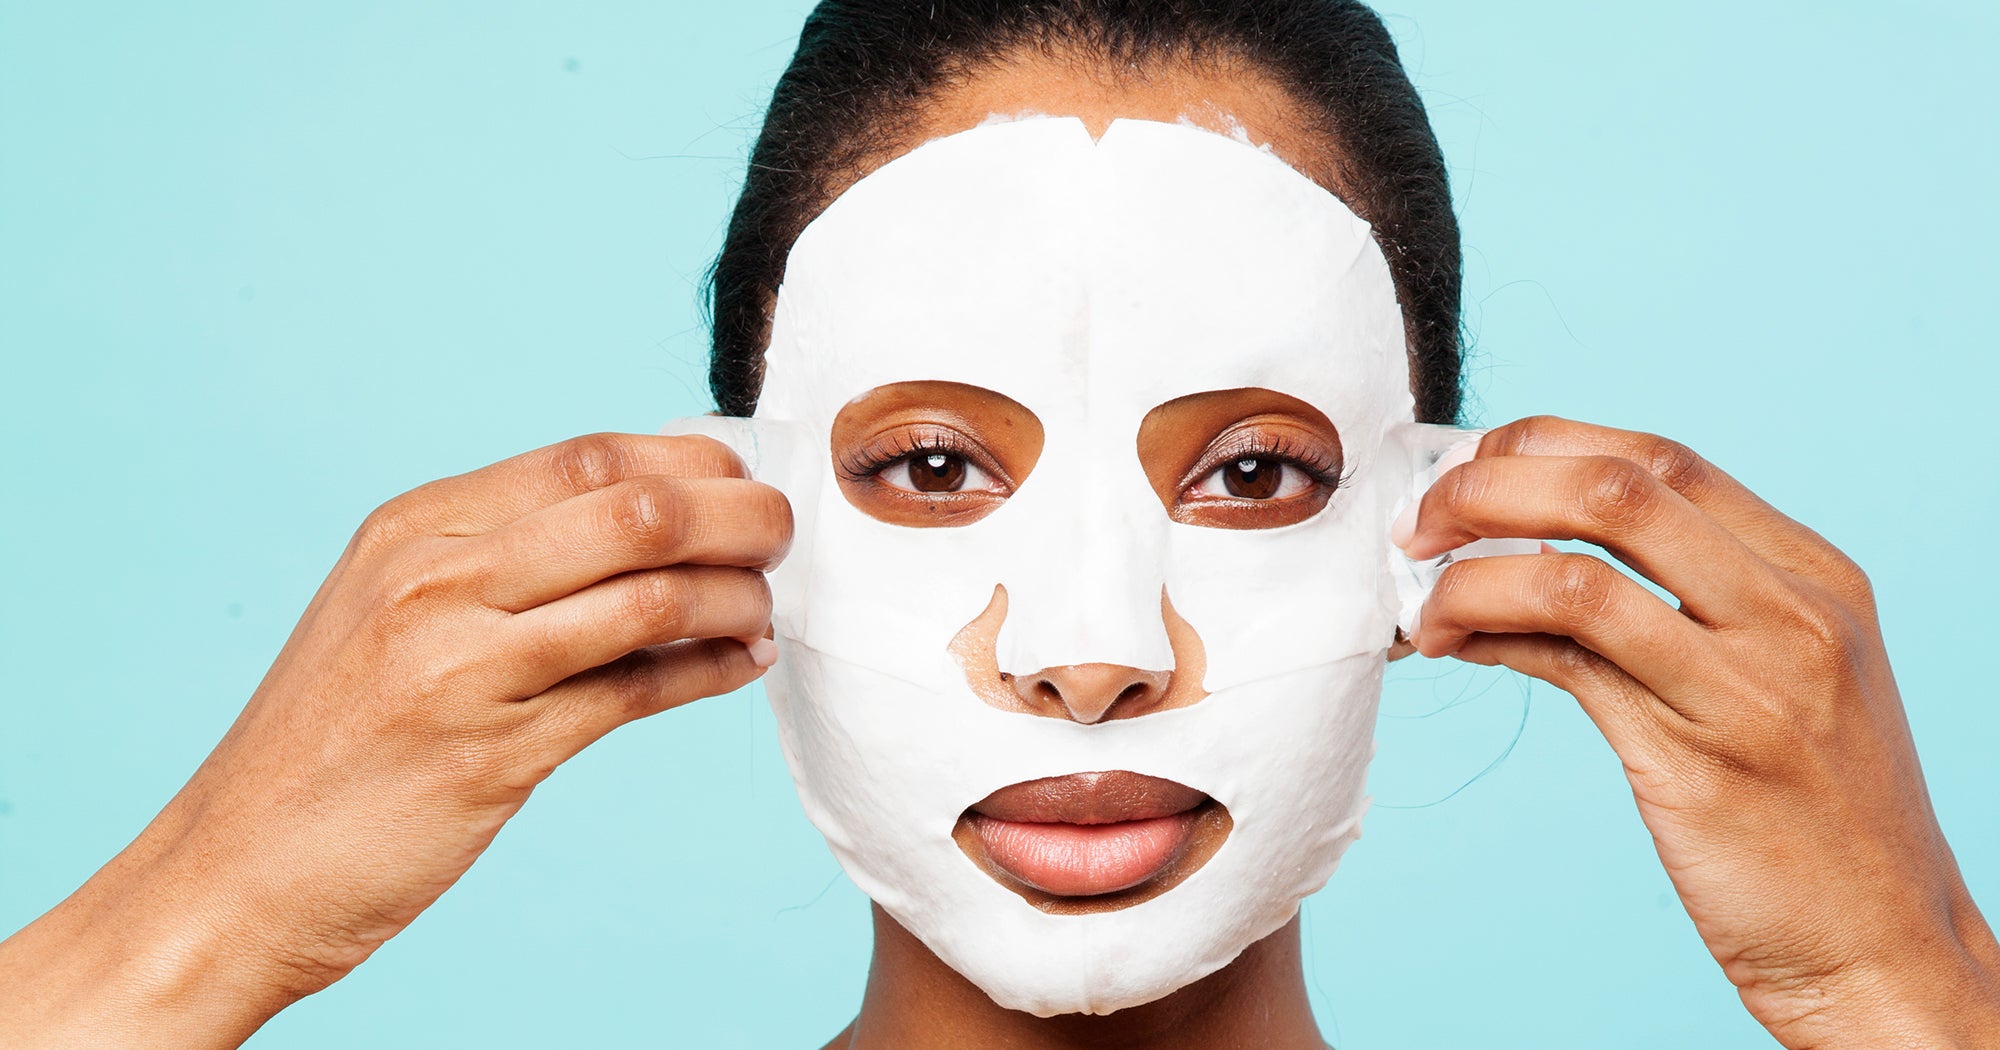 The Beauty Editors’ Guide To The Best Sheet Masks